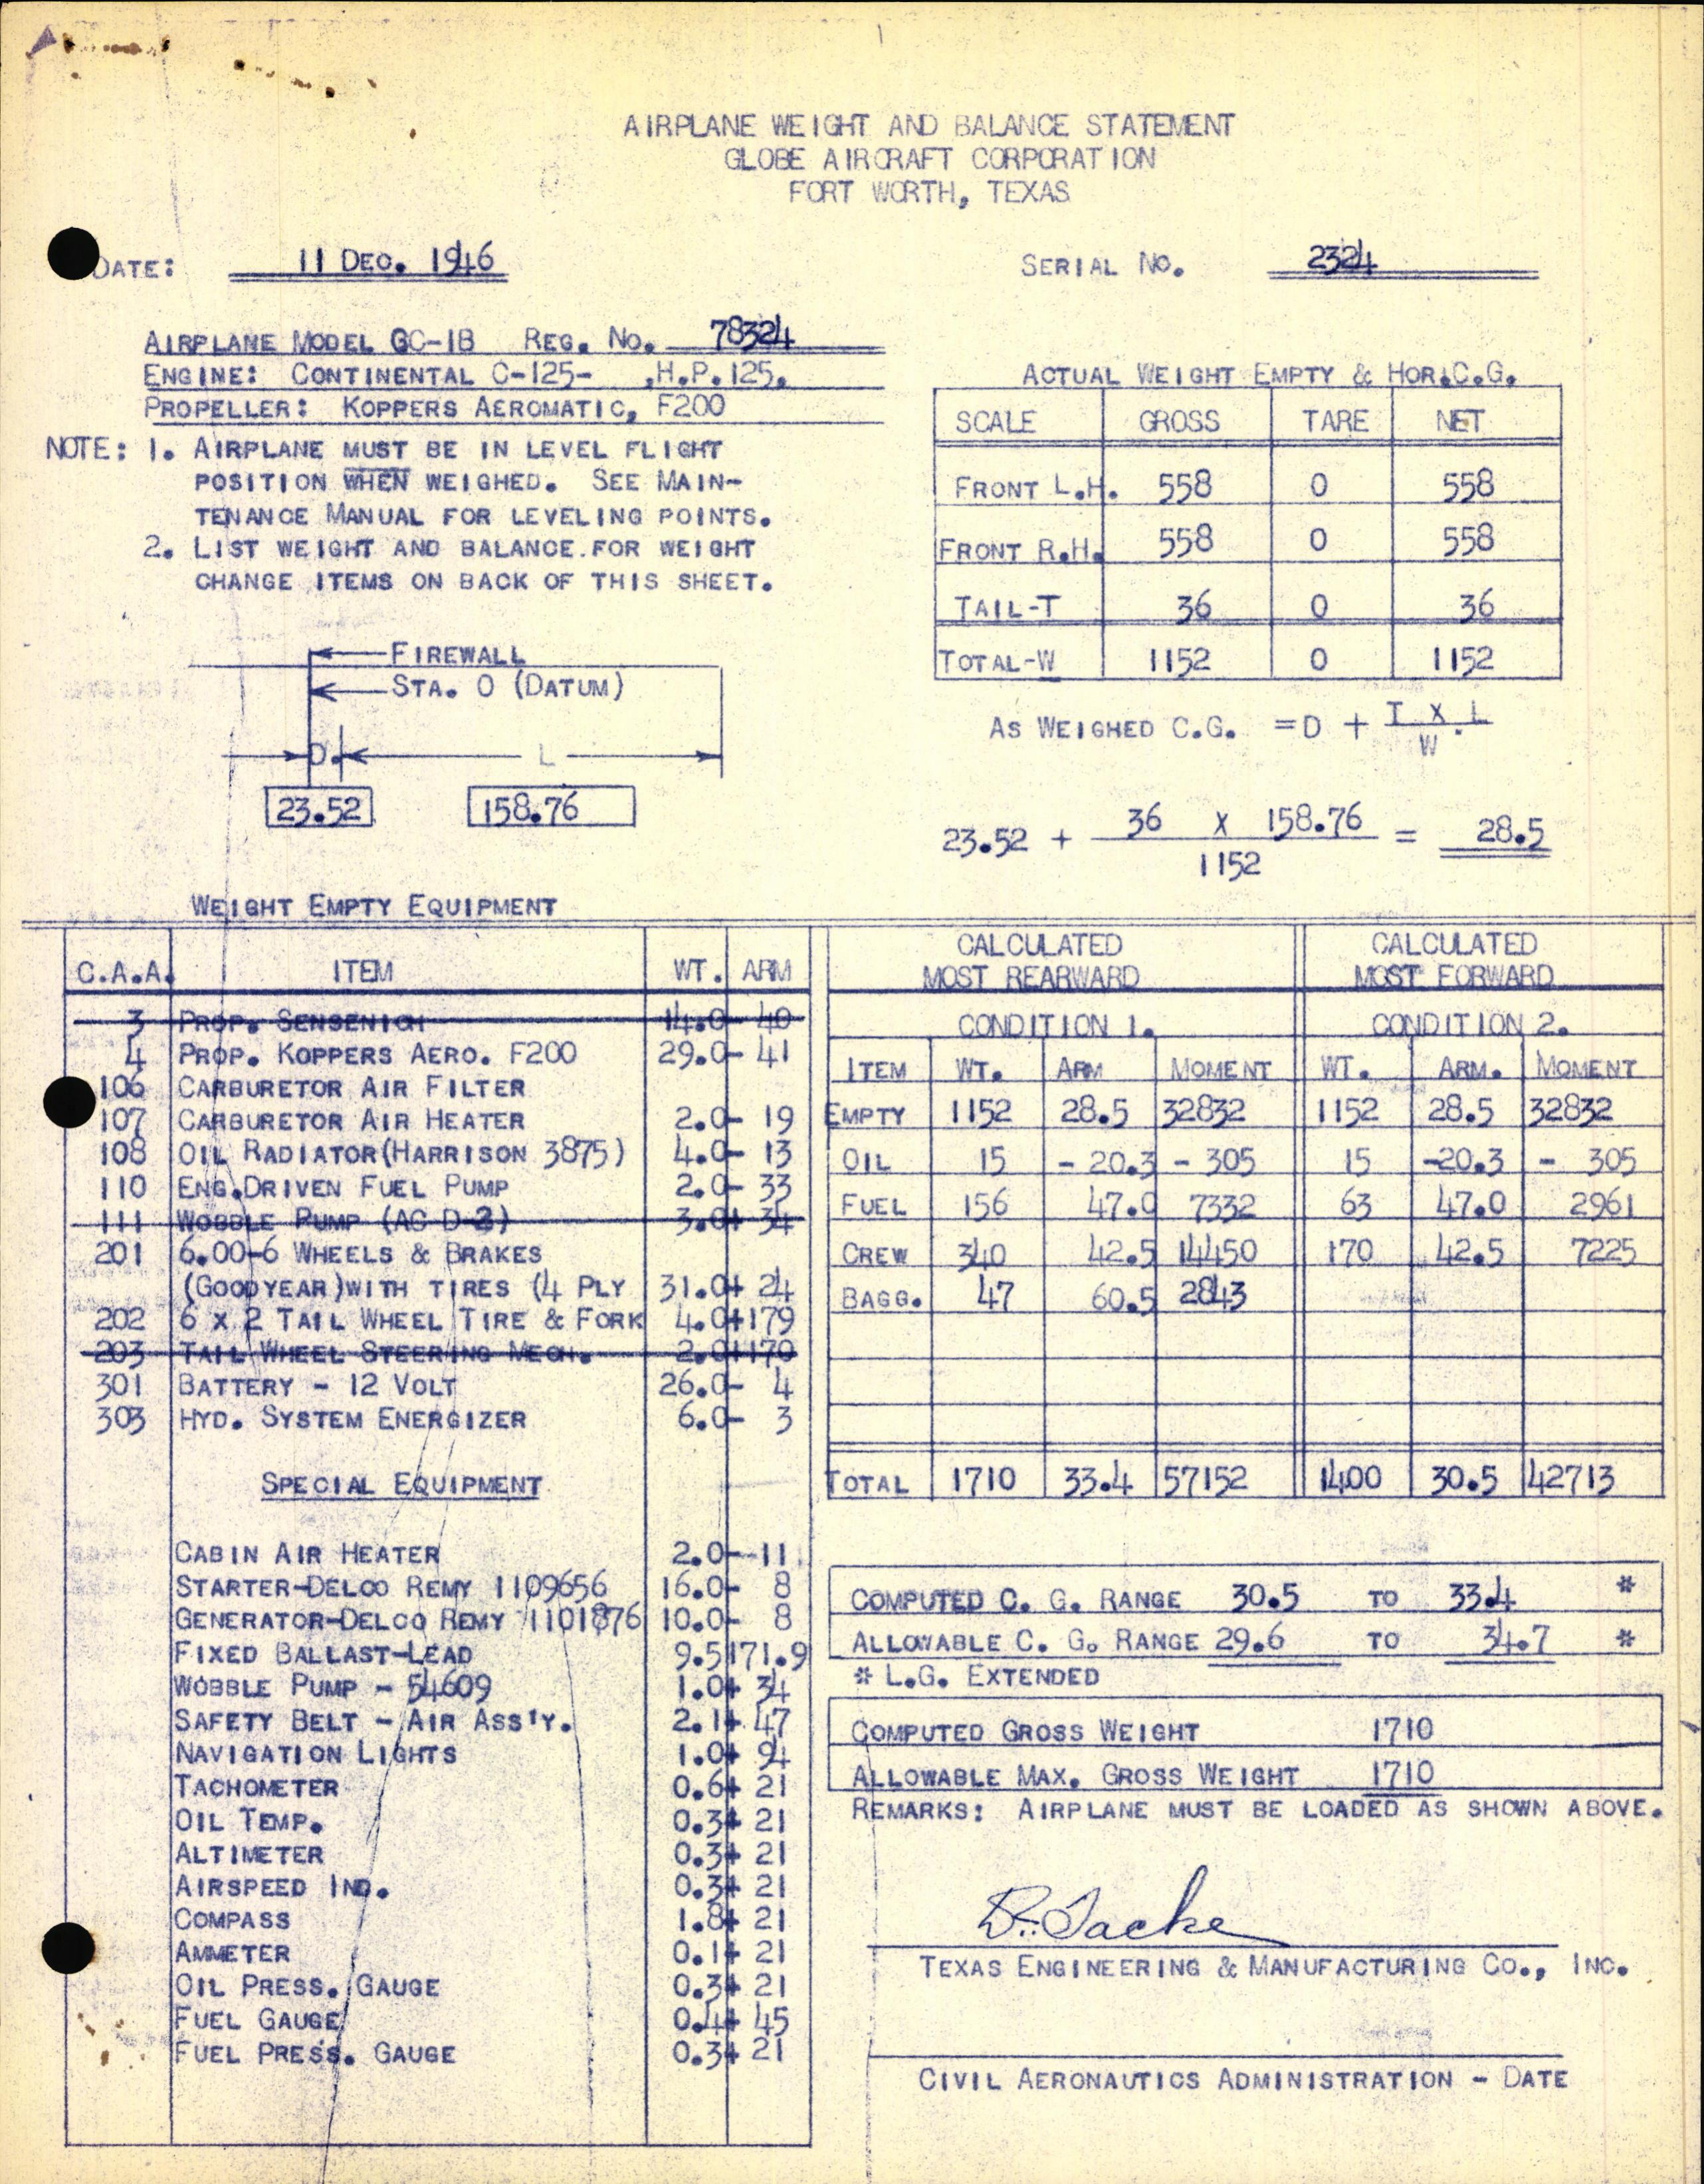 Sample page 3 from AirCorps Library document: Technical Information for Serial Number 2324